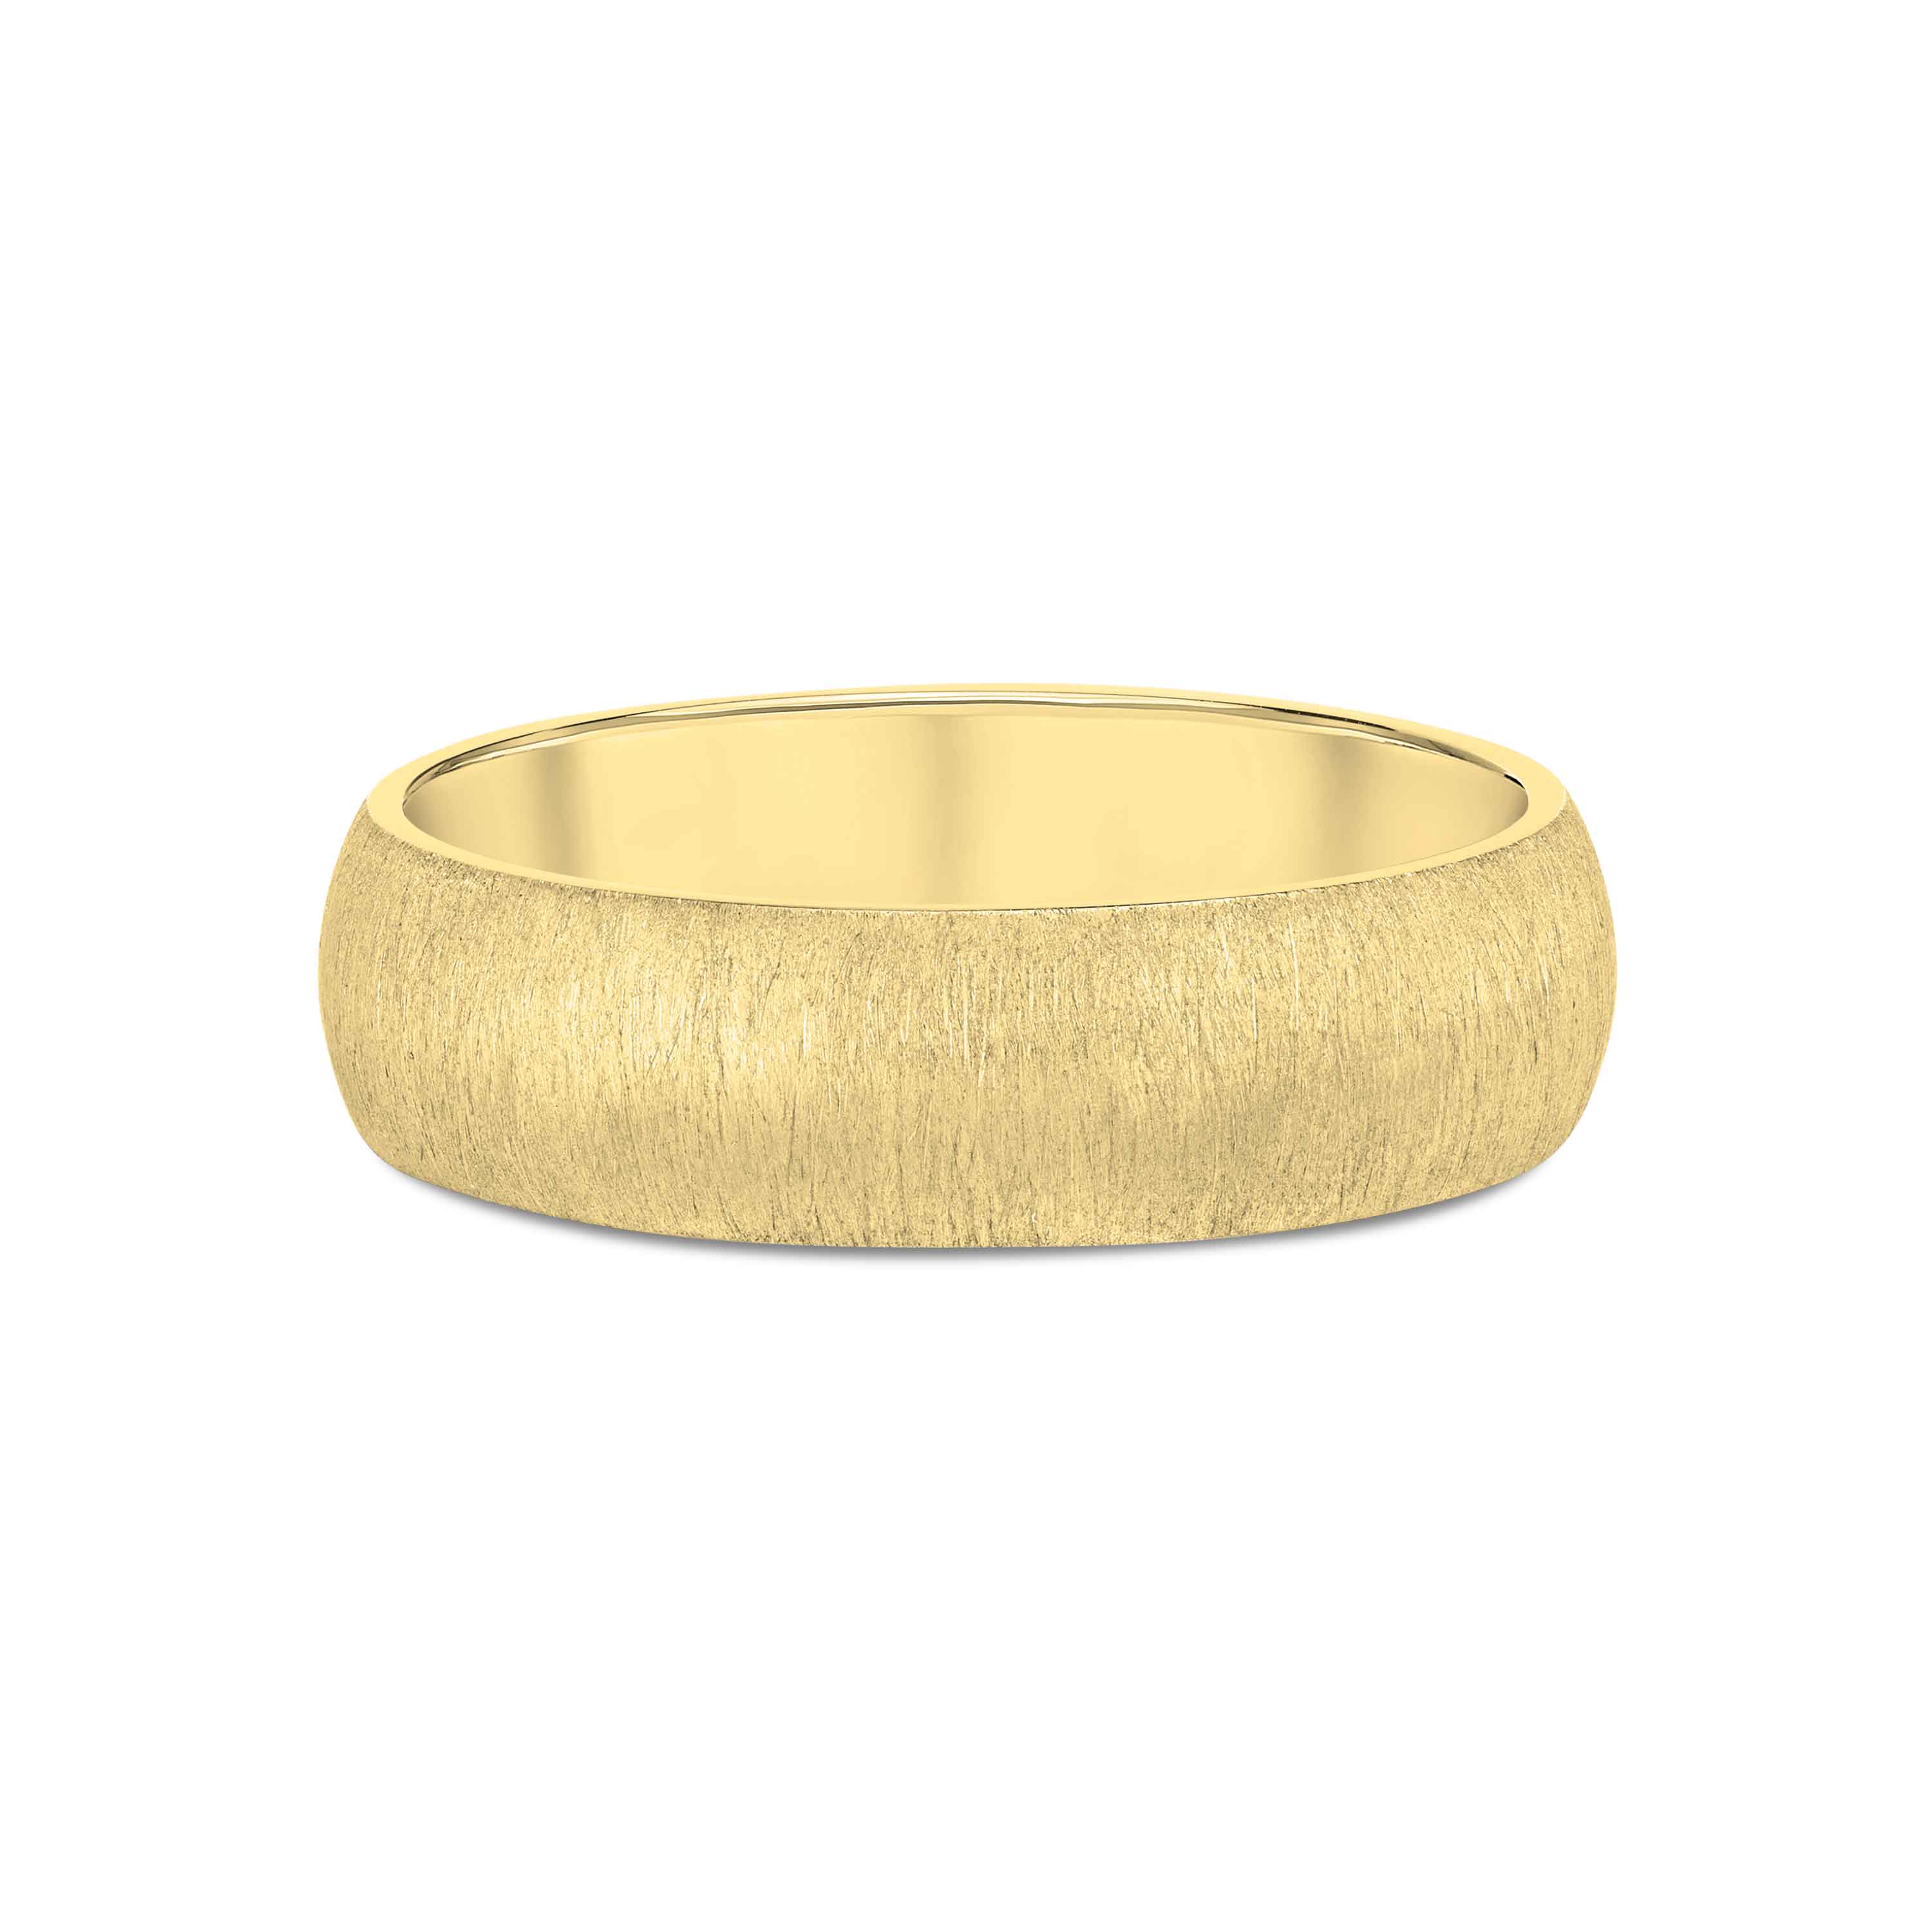 Moira Patience Fine Jewellery Brushed textured wedding band